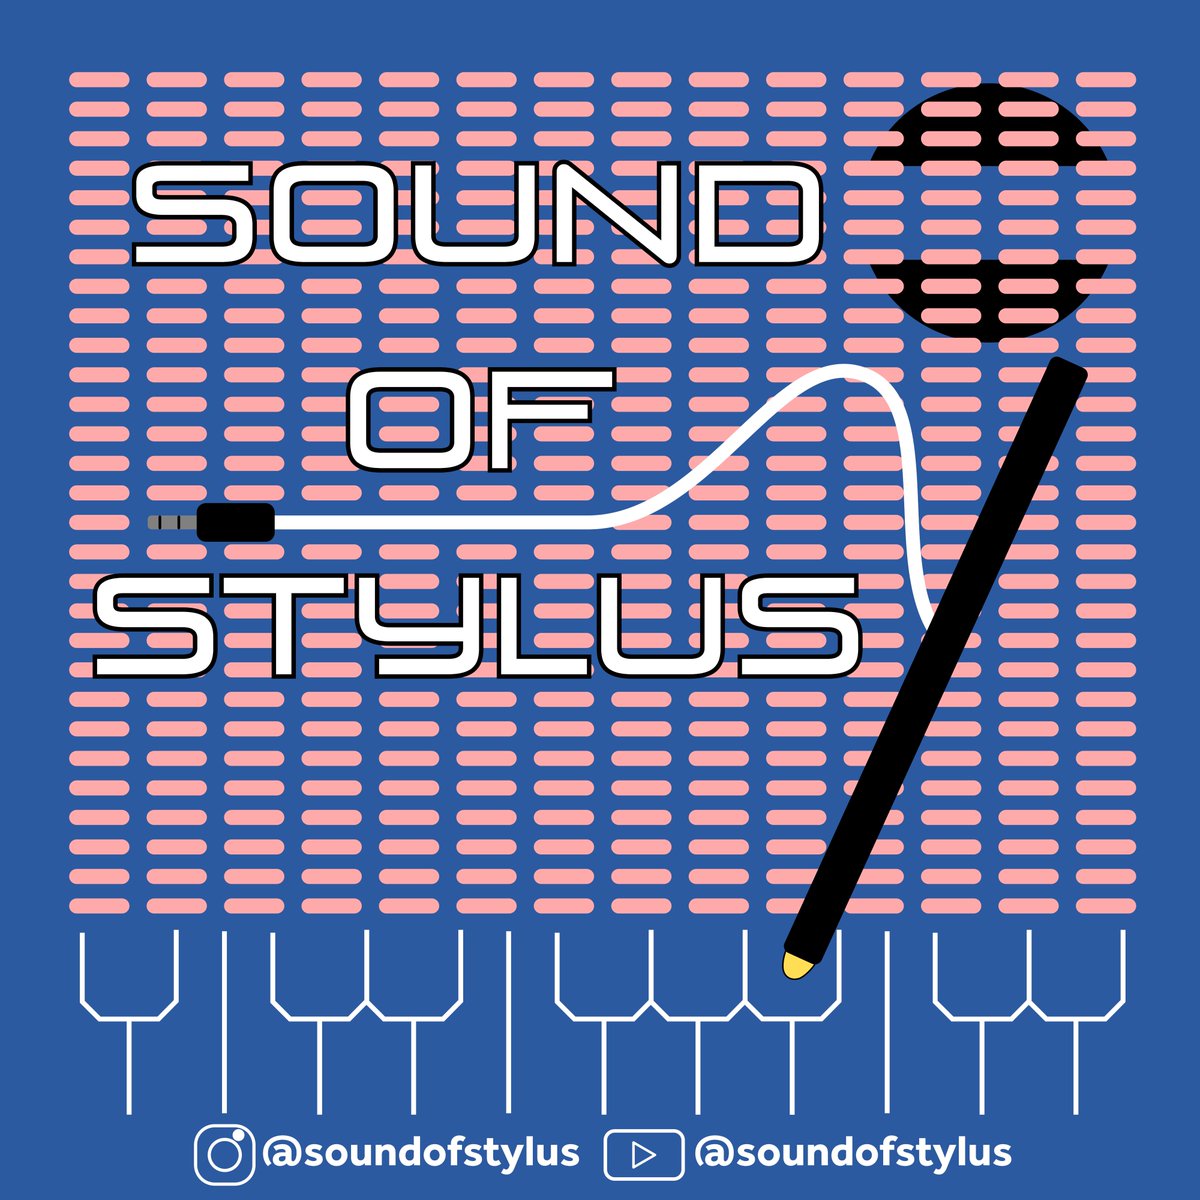 Important announcement!! Series 1 of the Sound Of Stylus podcast is now available to listen to on YouTube. Series 2 is on the way very soon. Stay up to date with schedule and guests on the dedicated instagram and listen here: lnk.bio/soundofstylus